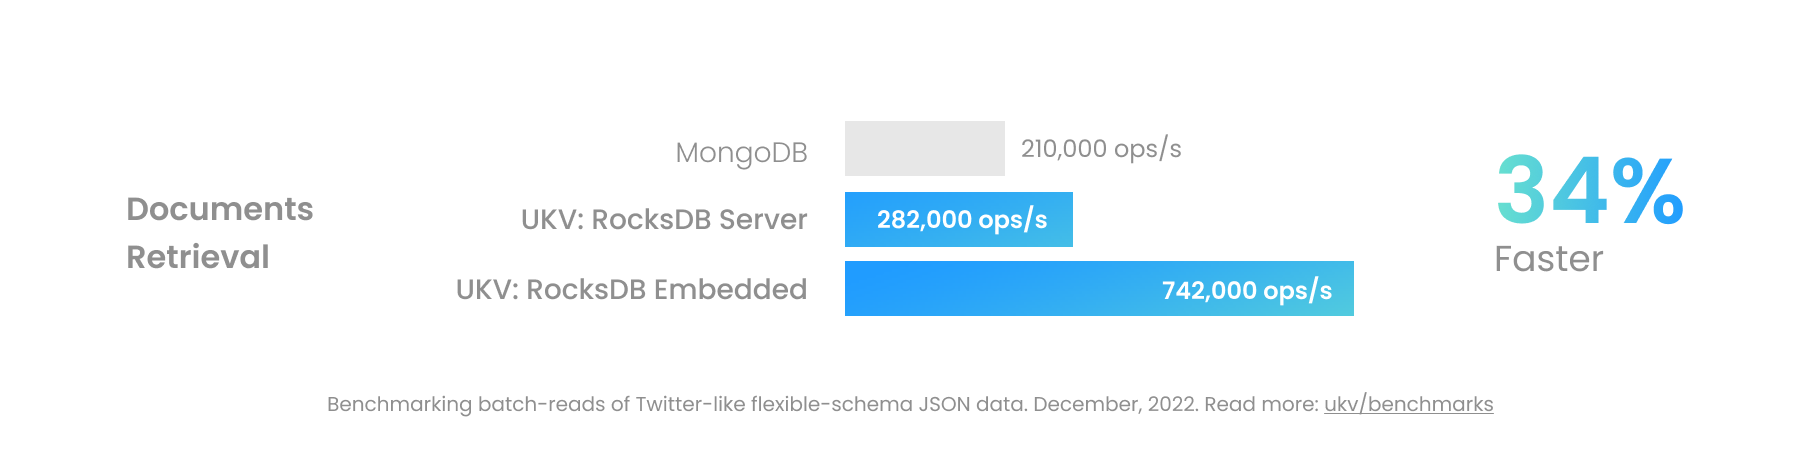 Documents Processing Performance Chart for UStore and MongoDB